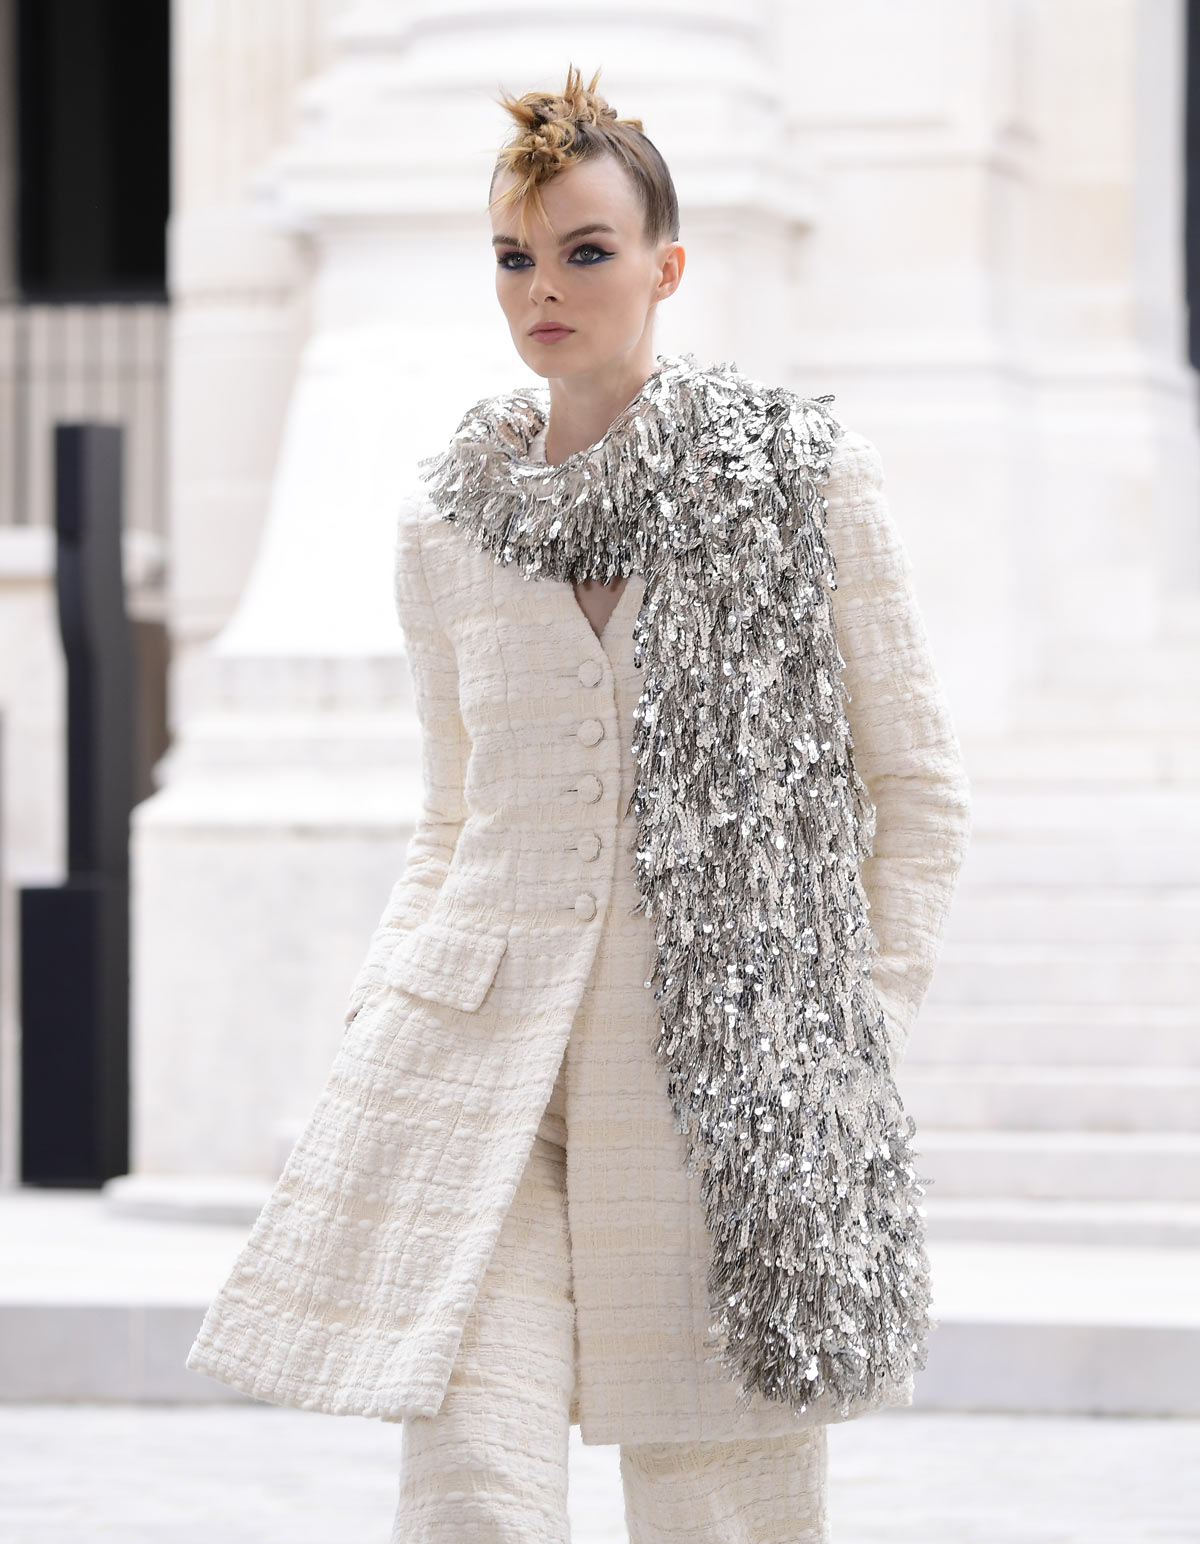 BREATHTAKING Looks From Chanel - Rediff.com